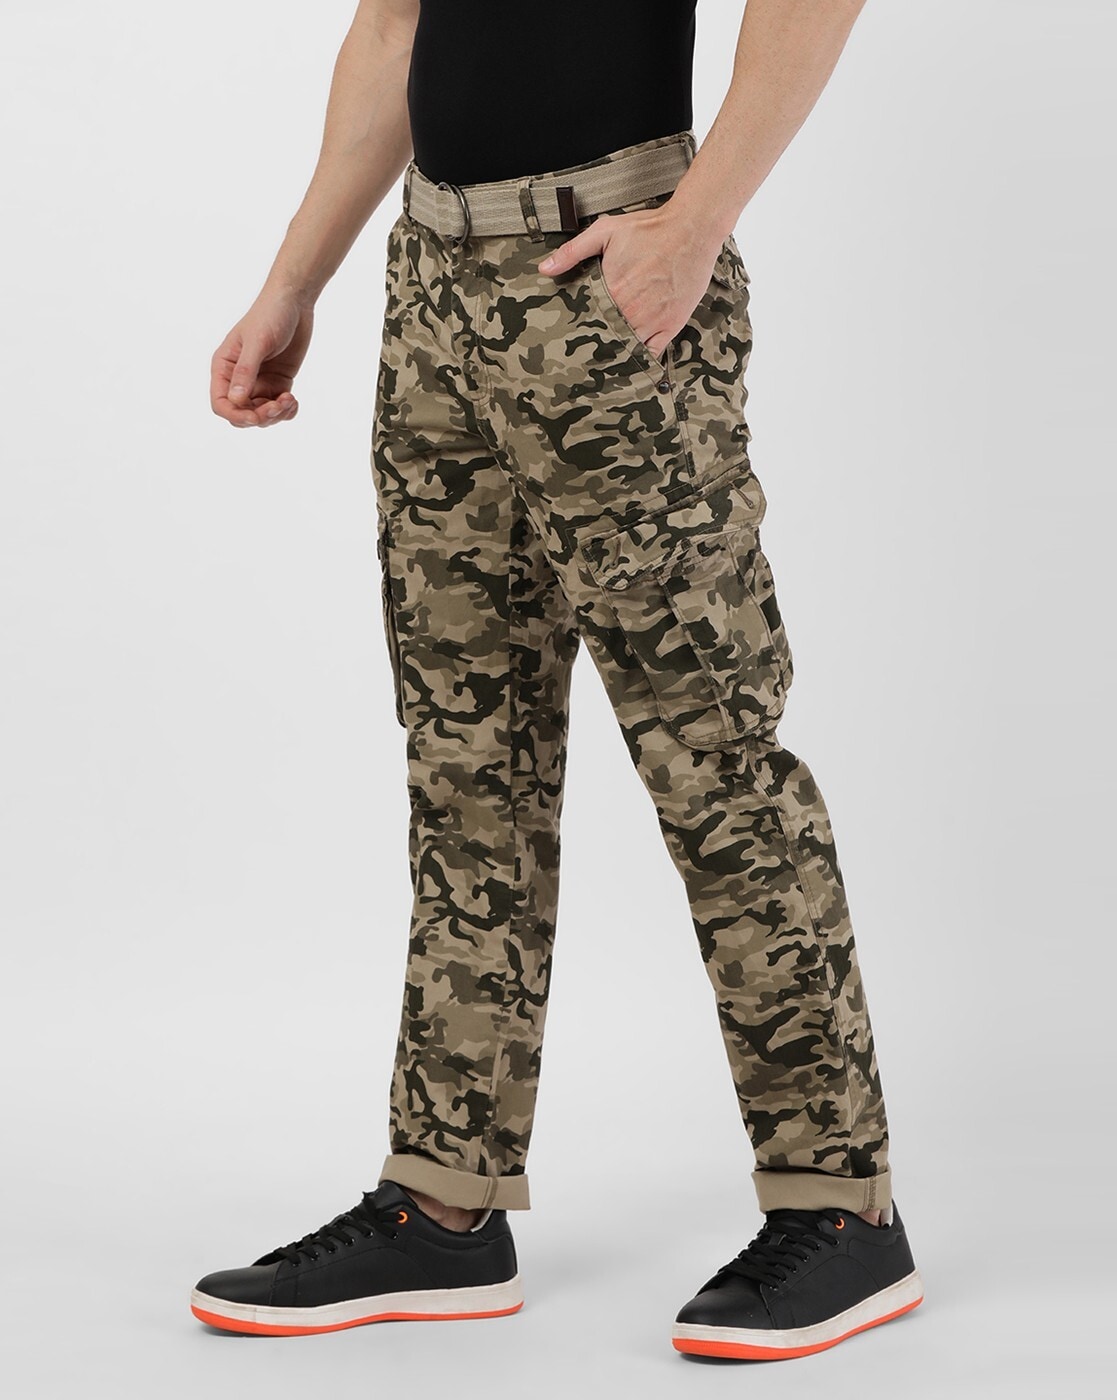 Men's camouflage cargo trousers, Cargo Pant for Men, Pocket Cargo Pant,  Polyester Cargo Pant, कार्गो पैंट - Star Traders, Visakhapatnam | ID:  2851813439397